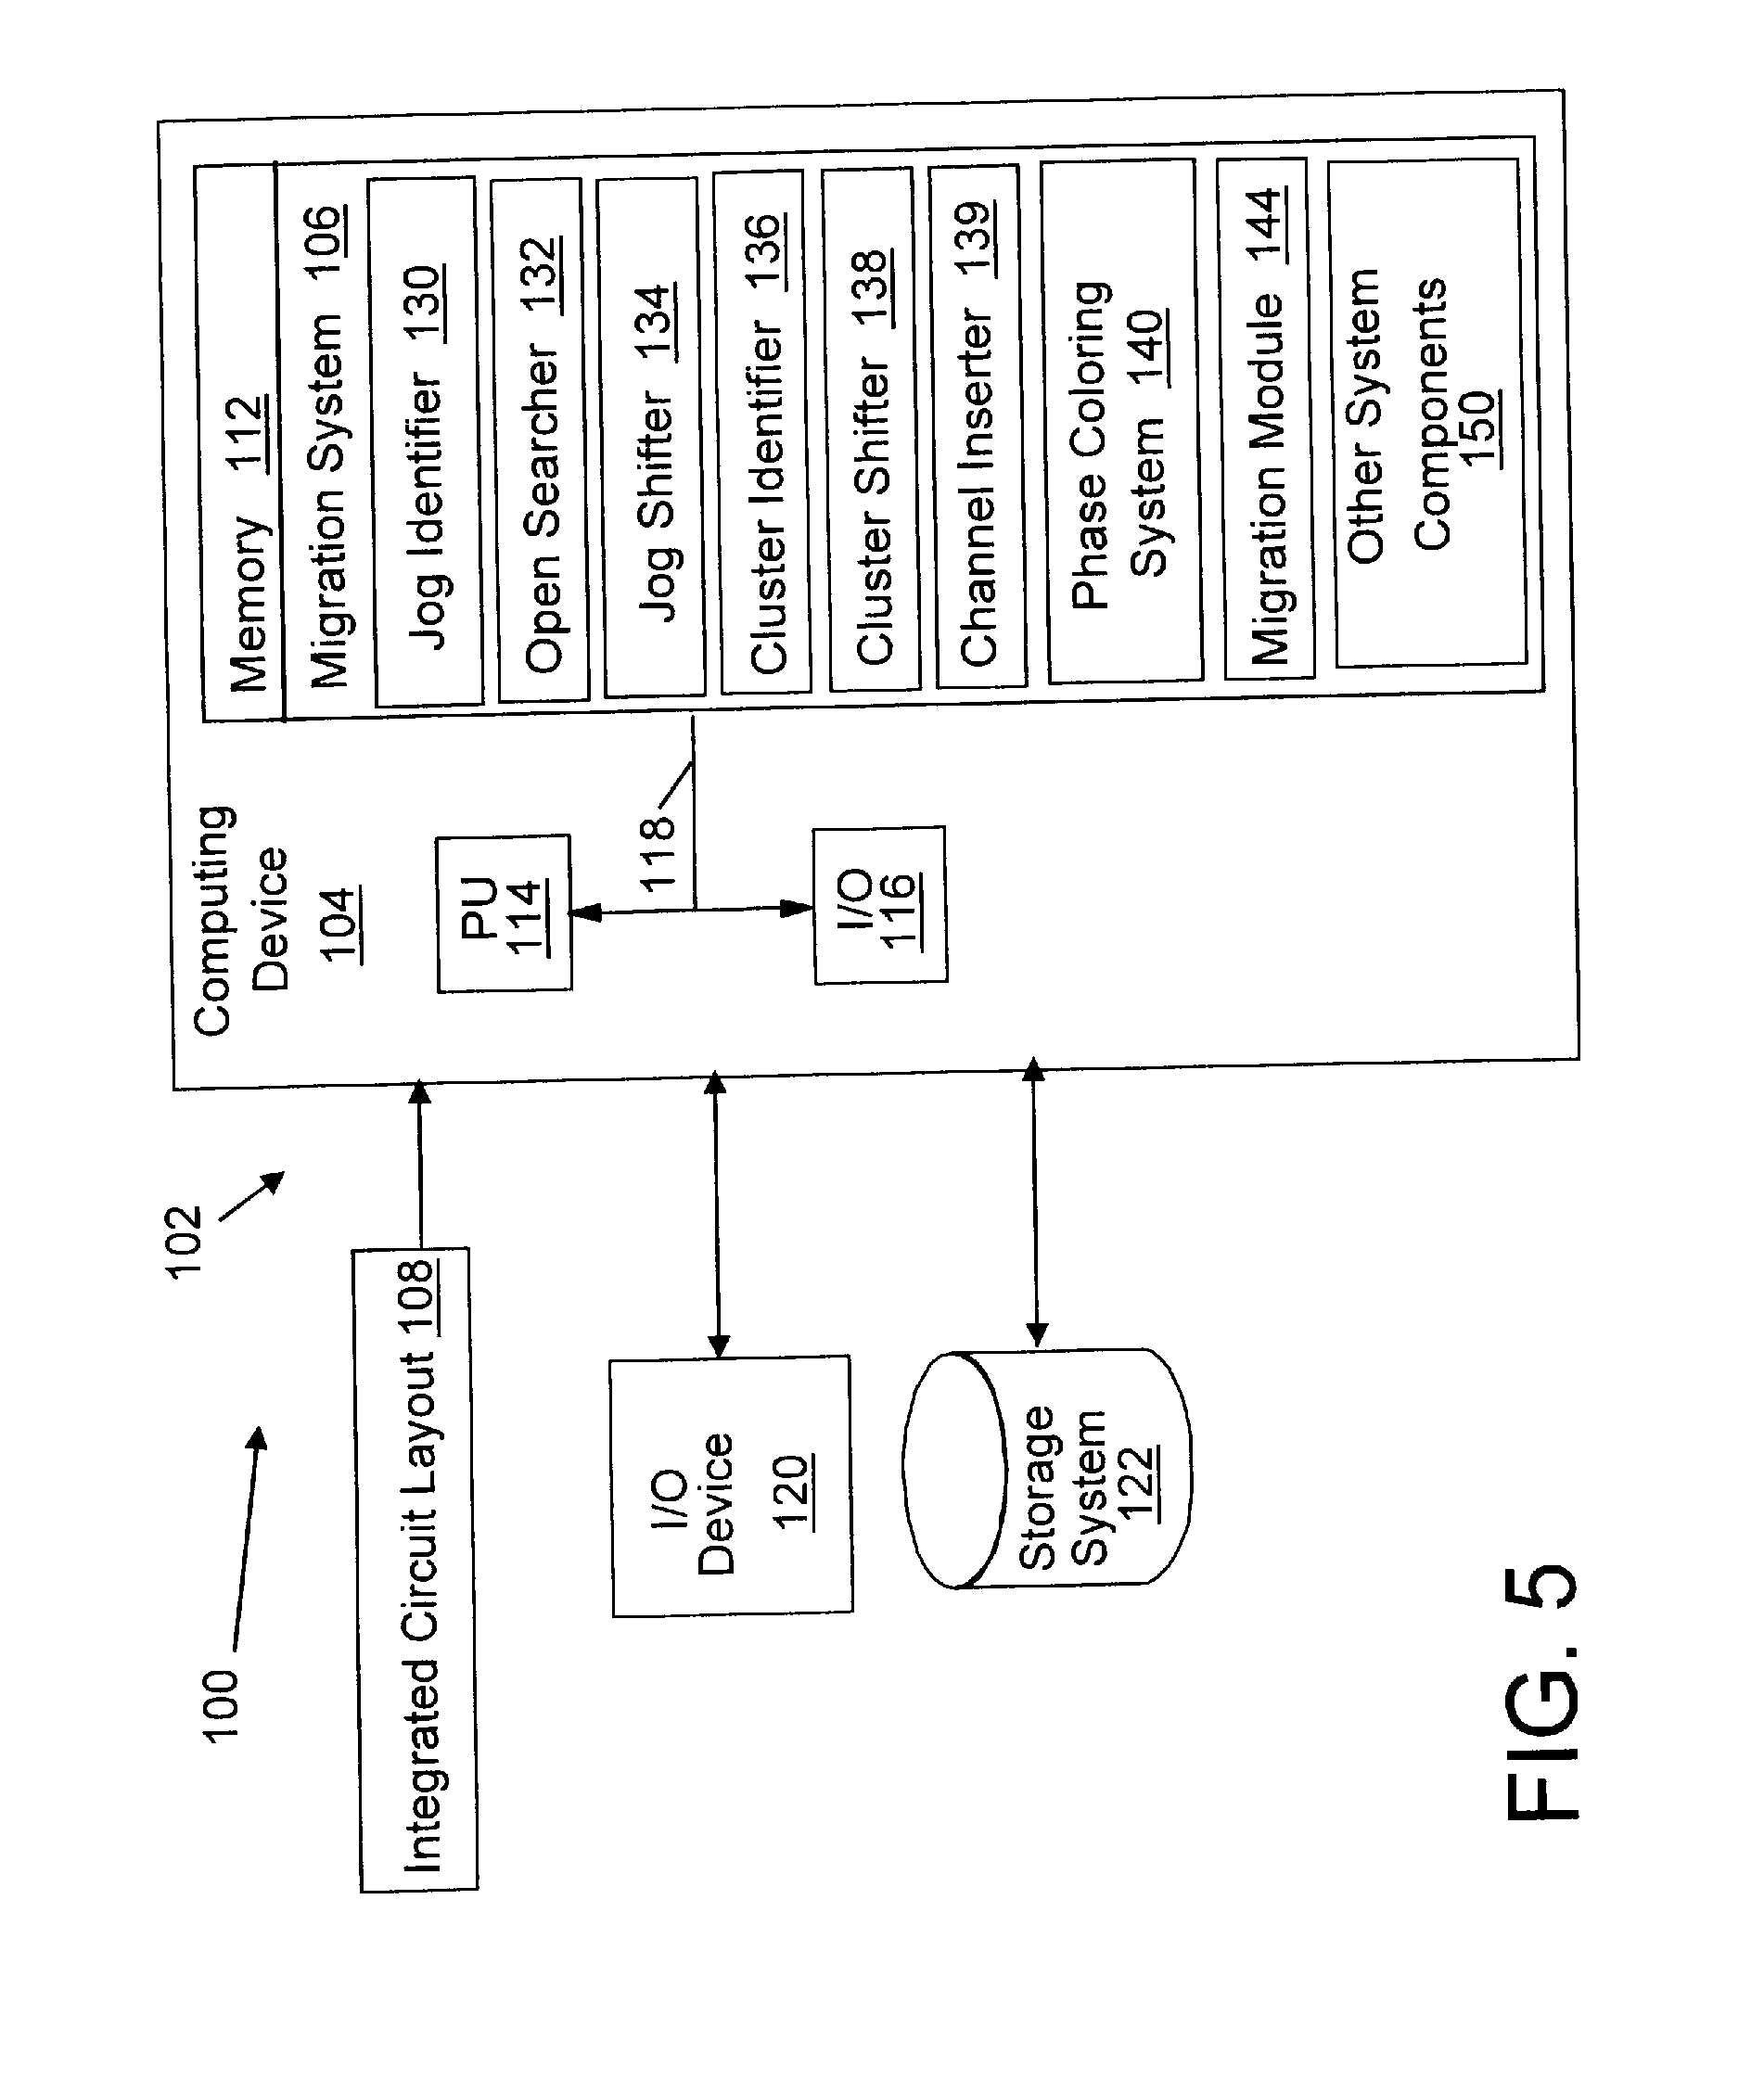 Migration of integrated circuit layout for alternating phase shift masks